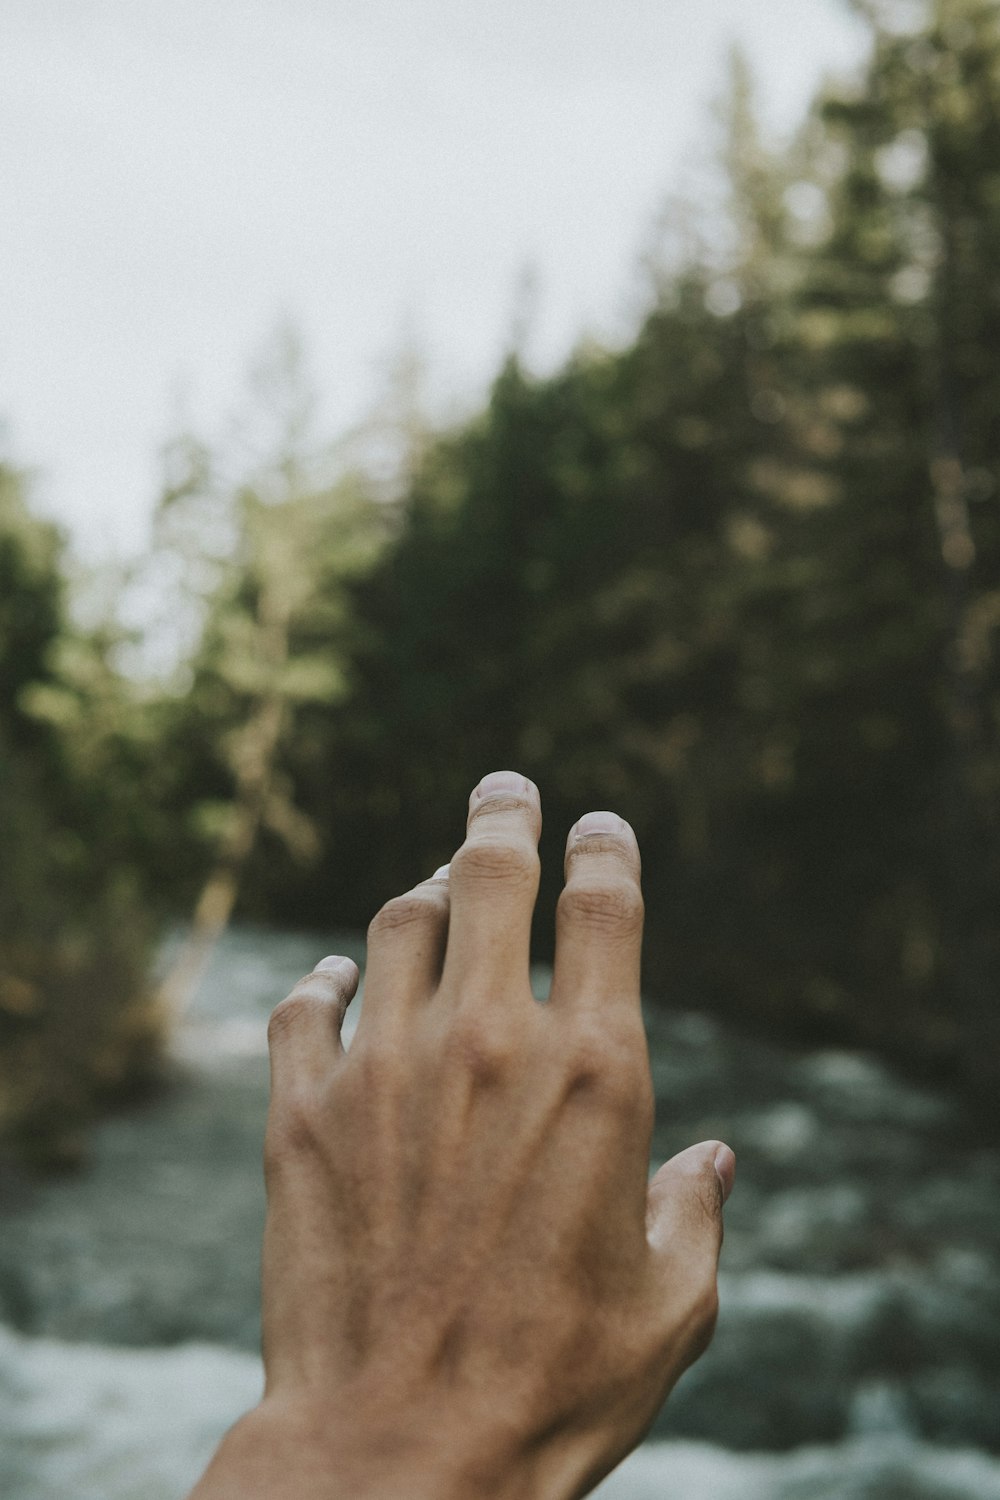 person's hand in shallow focus